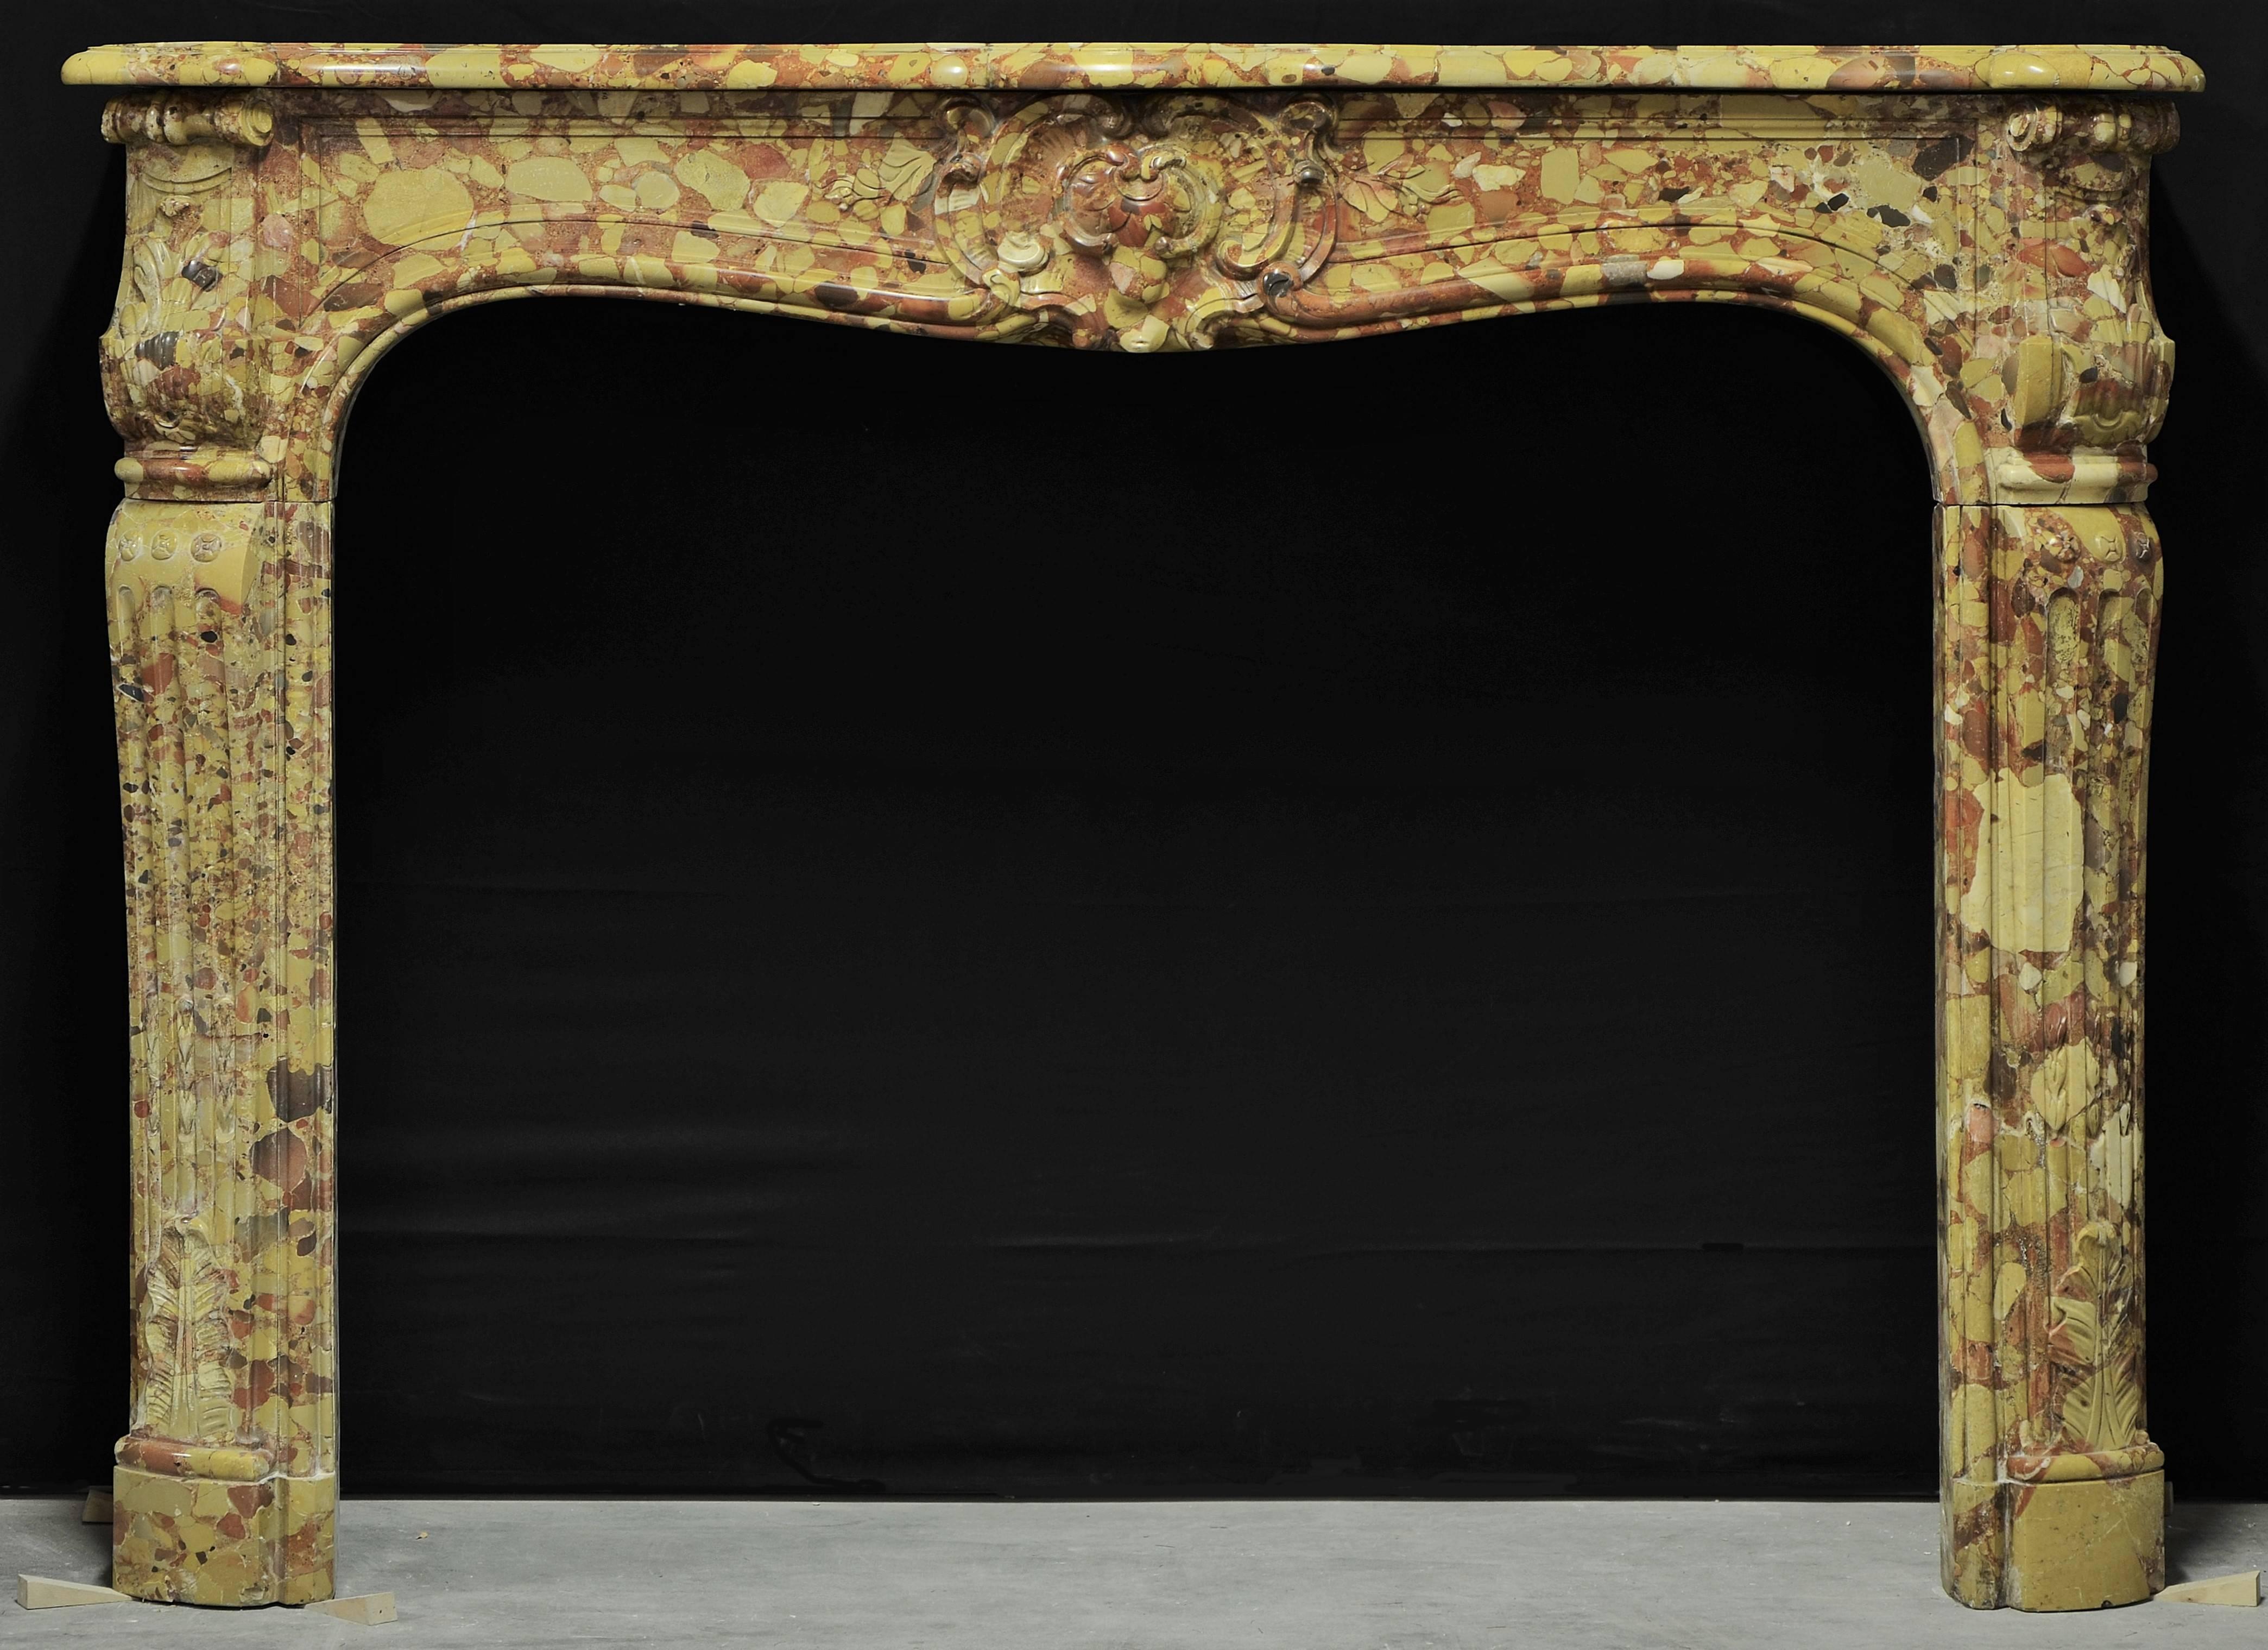 18th century Louis XV-XVI mantelpiece from Paris in rare Breche D' Allepe marble.
Beautifully decorated with great colors.

Has minor restorations and repairs. Truly amazing piece.

Inside measurements: 35.8 x 43.3 inch (height x width).